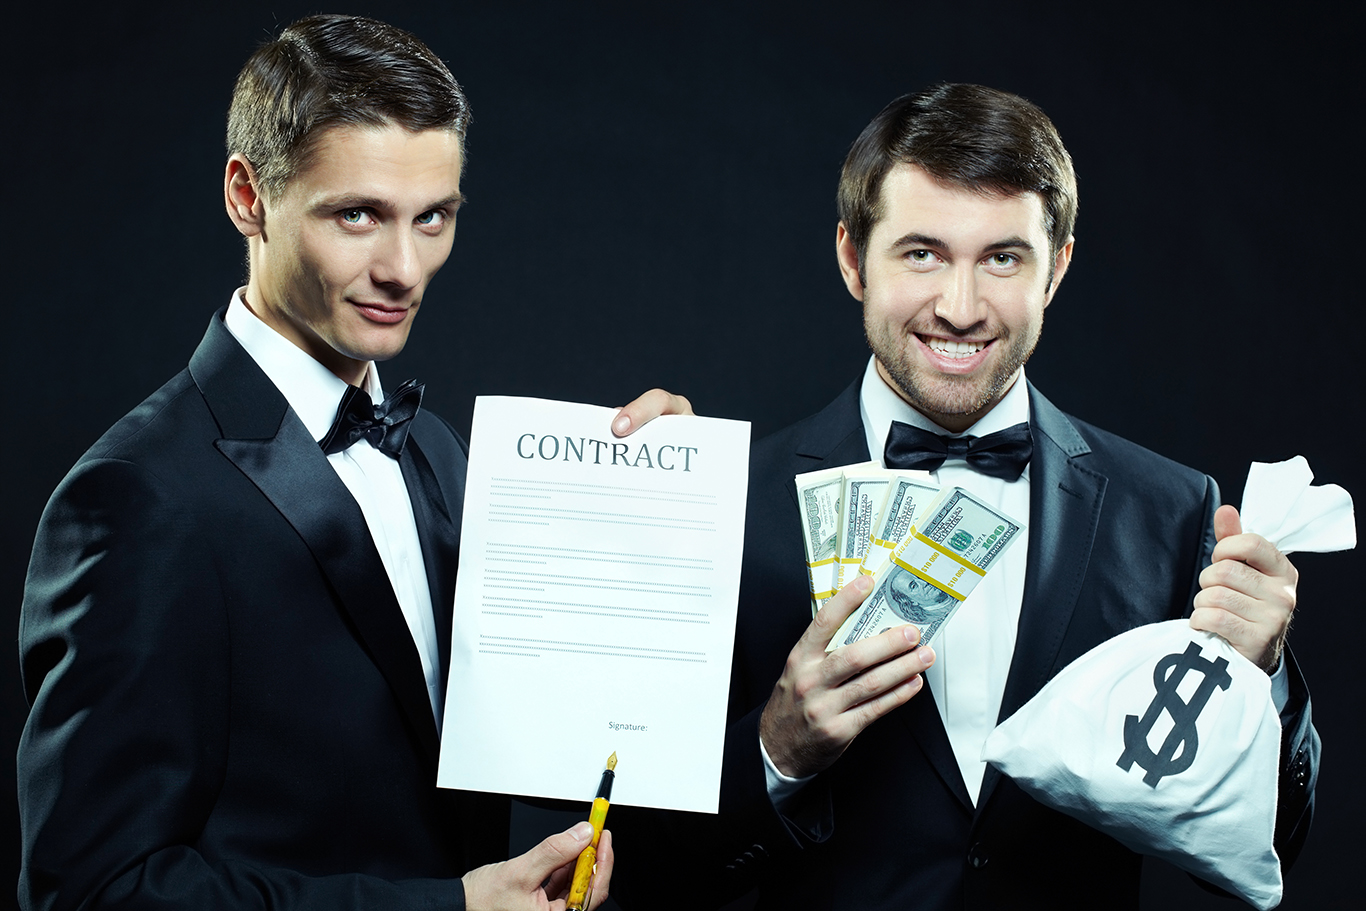 Fraud in the inducement to enter into a contract